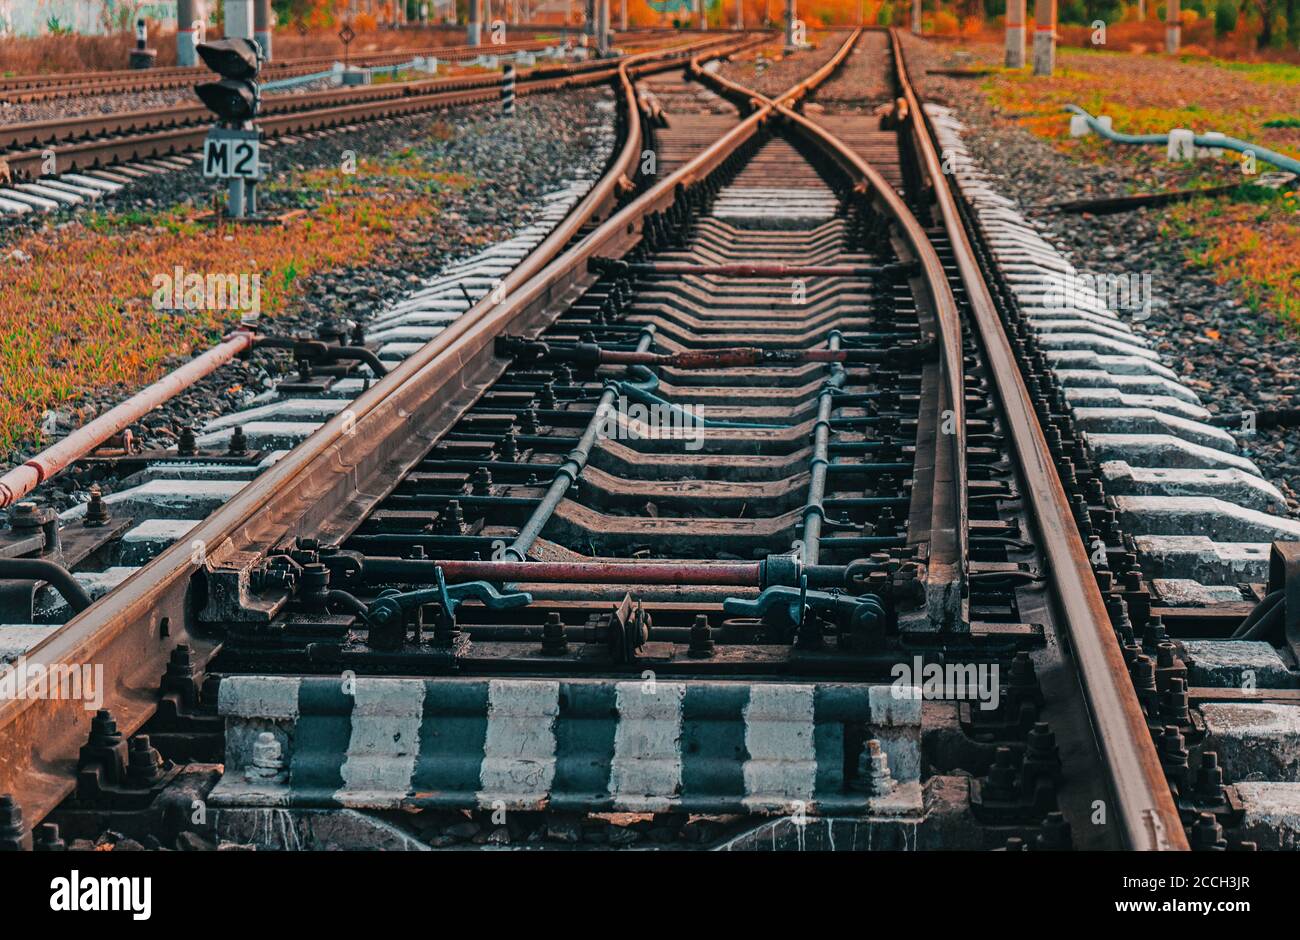 Railway intersections. Railroad leading in different directions. Railway switch close-up.  Stock Photo